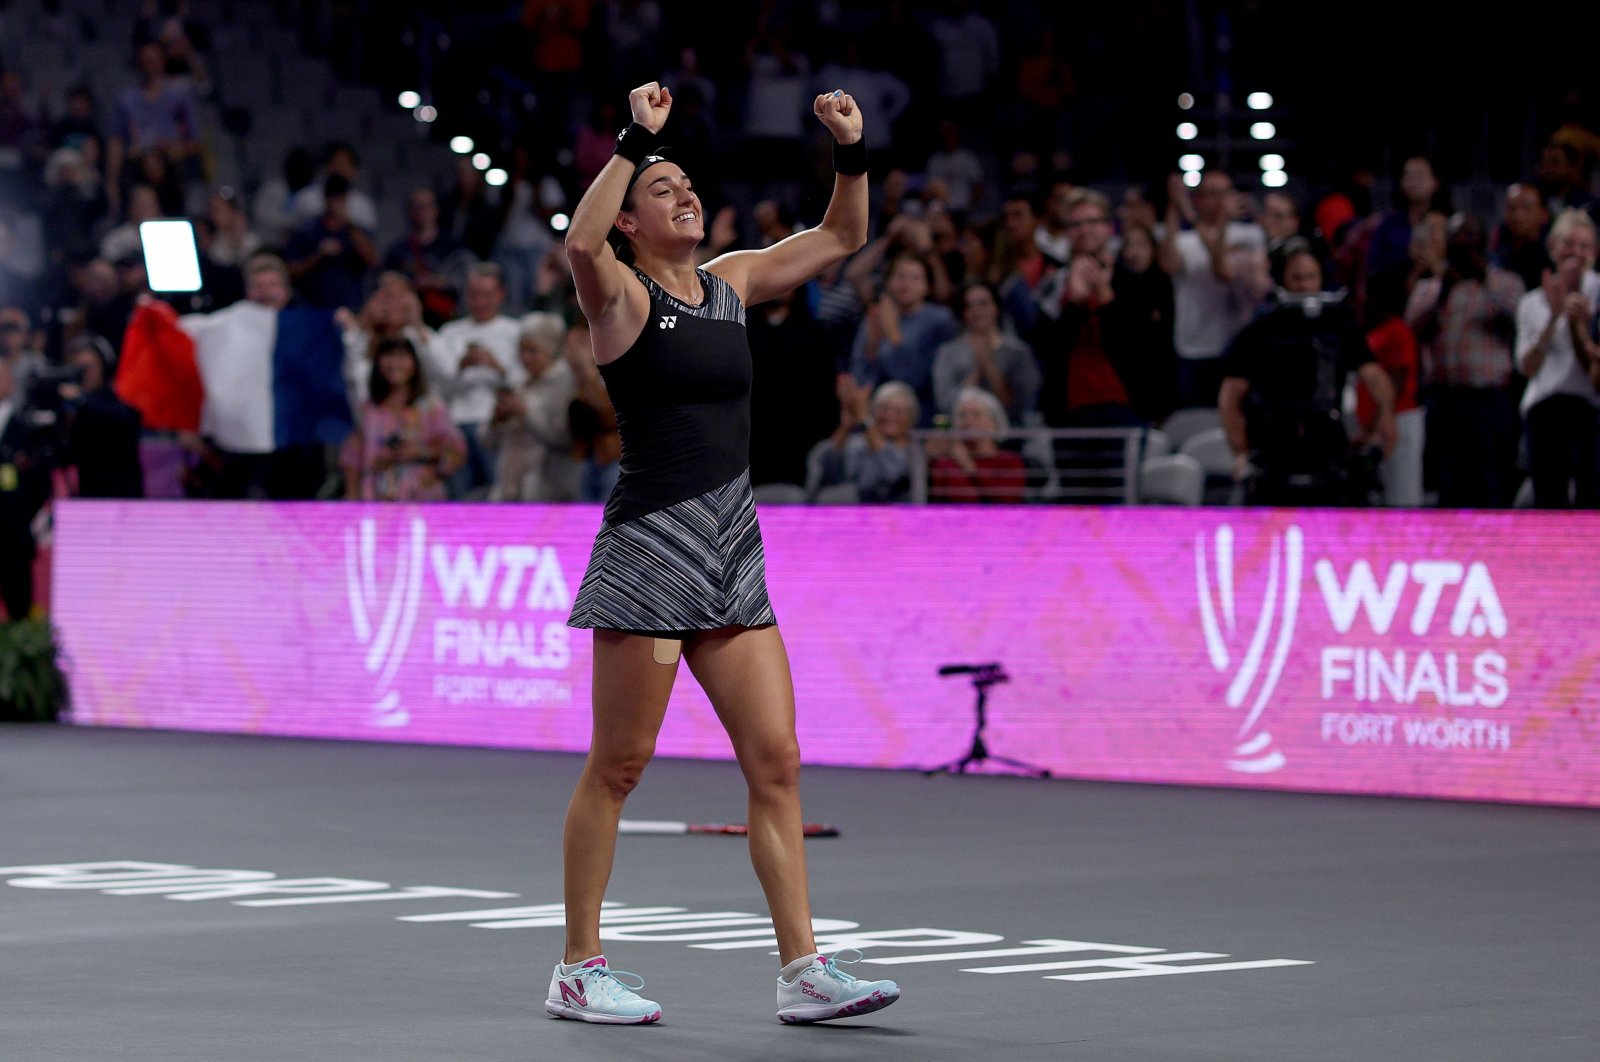 Caroline Garcia of France celebrates after defeating Aryna Sabalenka of Belarus in their Women&#039;s Singles Final match during the 2022 WTA Finals, part of the Hologic WTA Tour, at Dickies Arena, Fort Worth, Texas, U.S., Nov. 7, 2022. (AFP Photo)